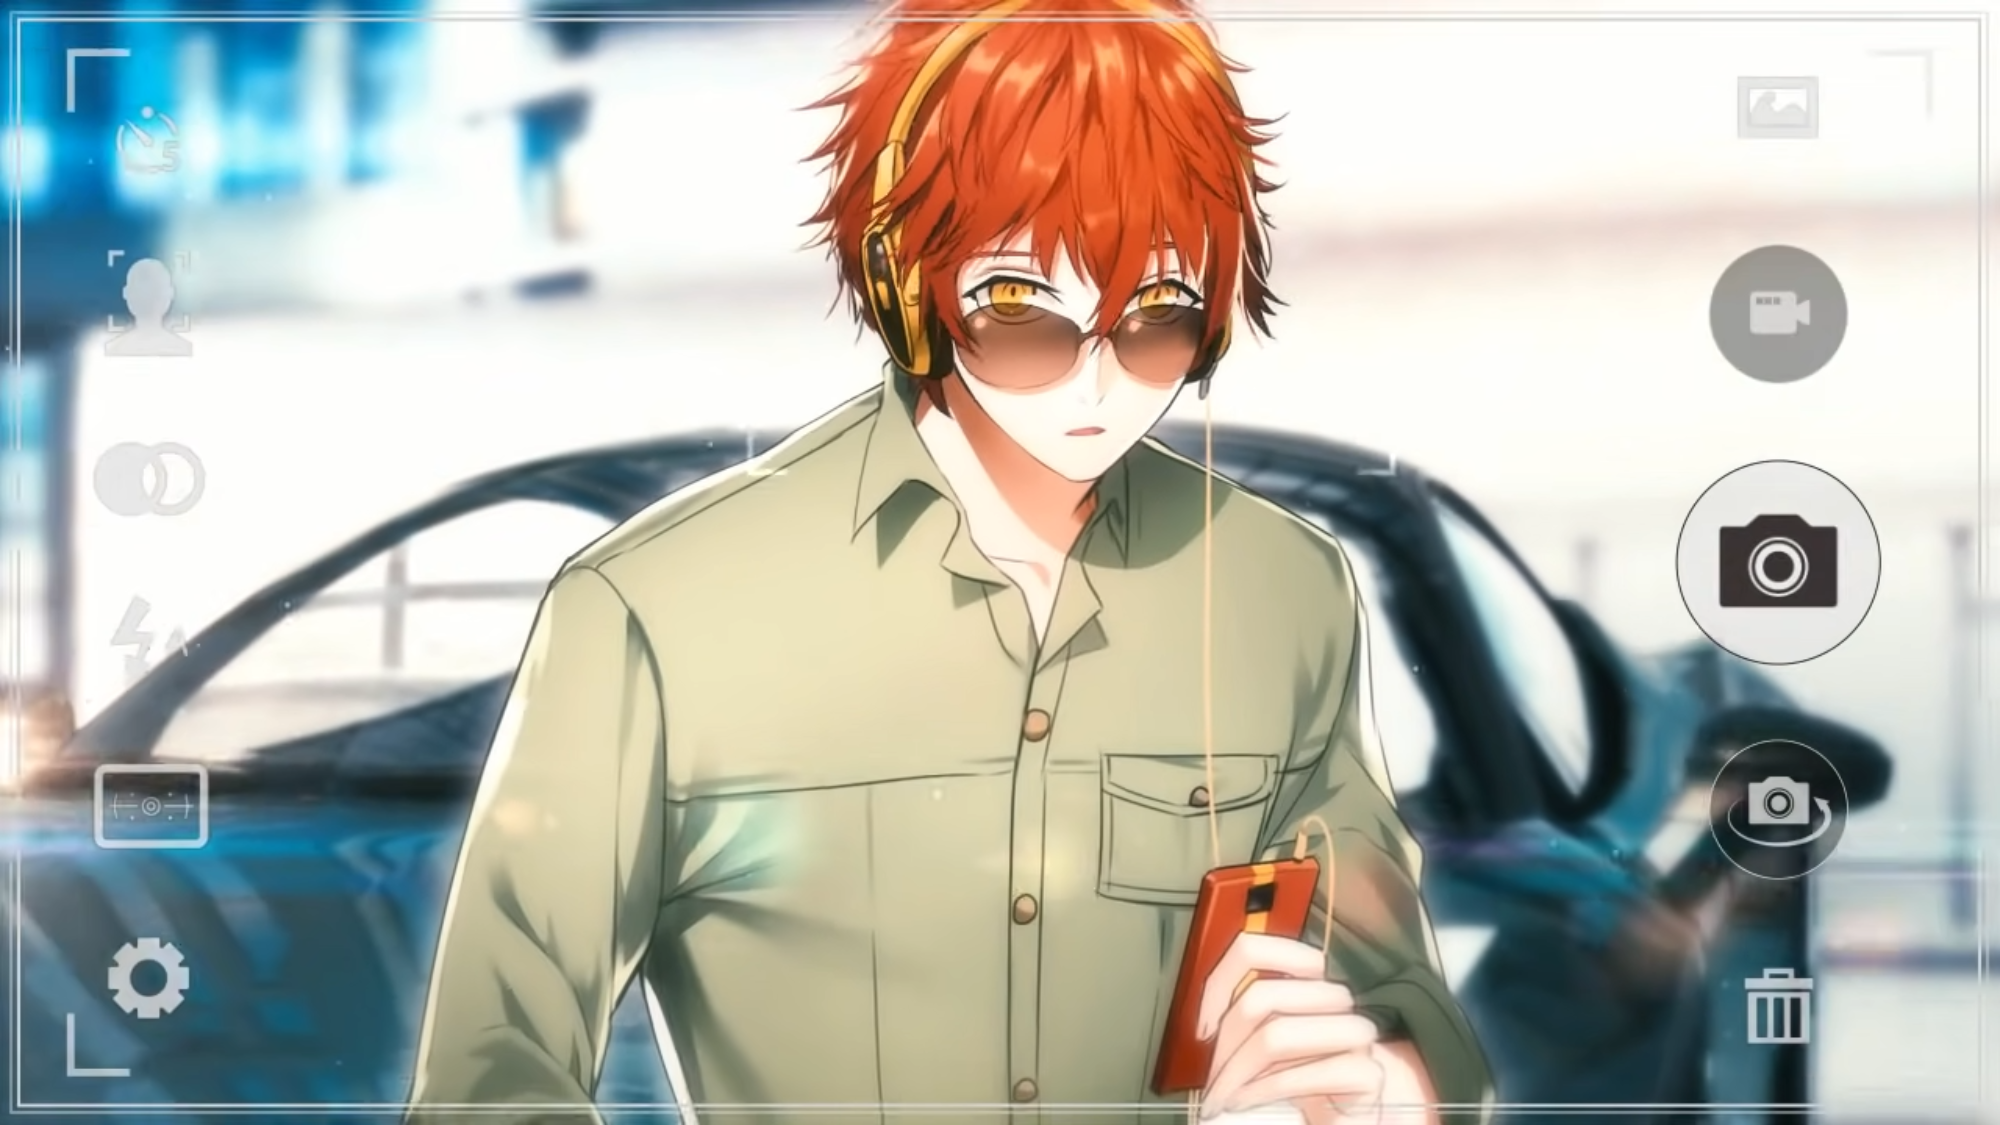 Image for Mystic Messenger 707 route chat times schedule – Days 5, 6, 7, 8, 9, 10 and 11 (Deep Story mode)